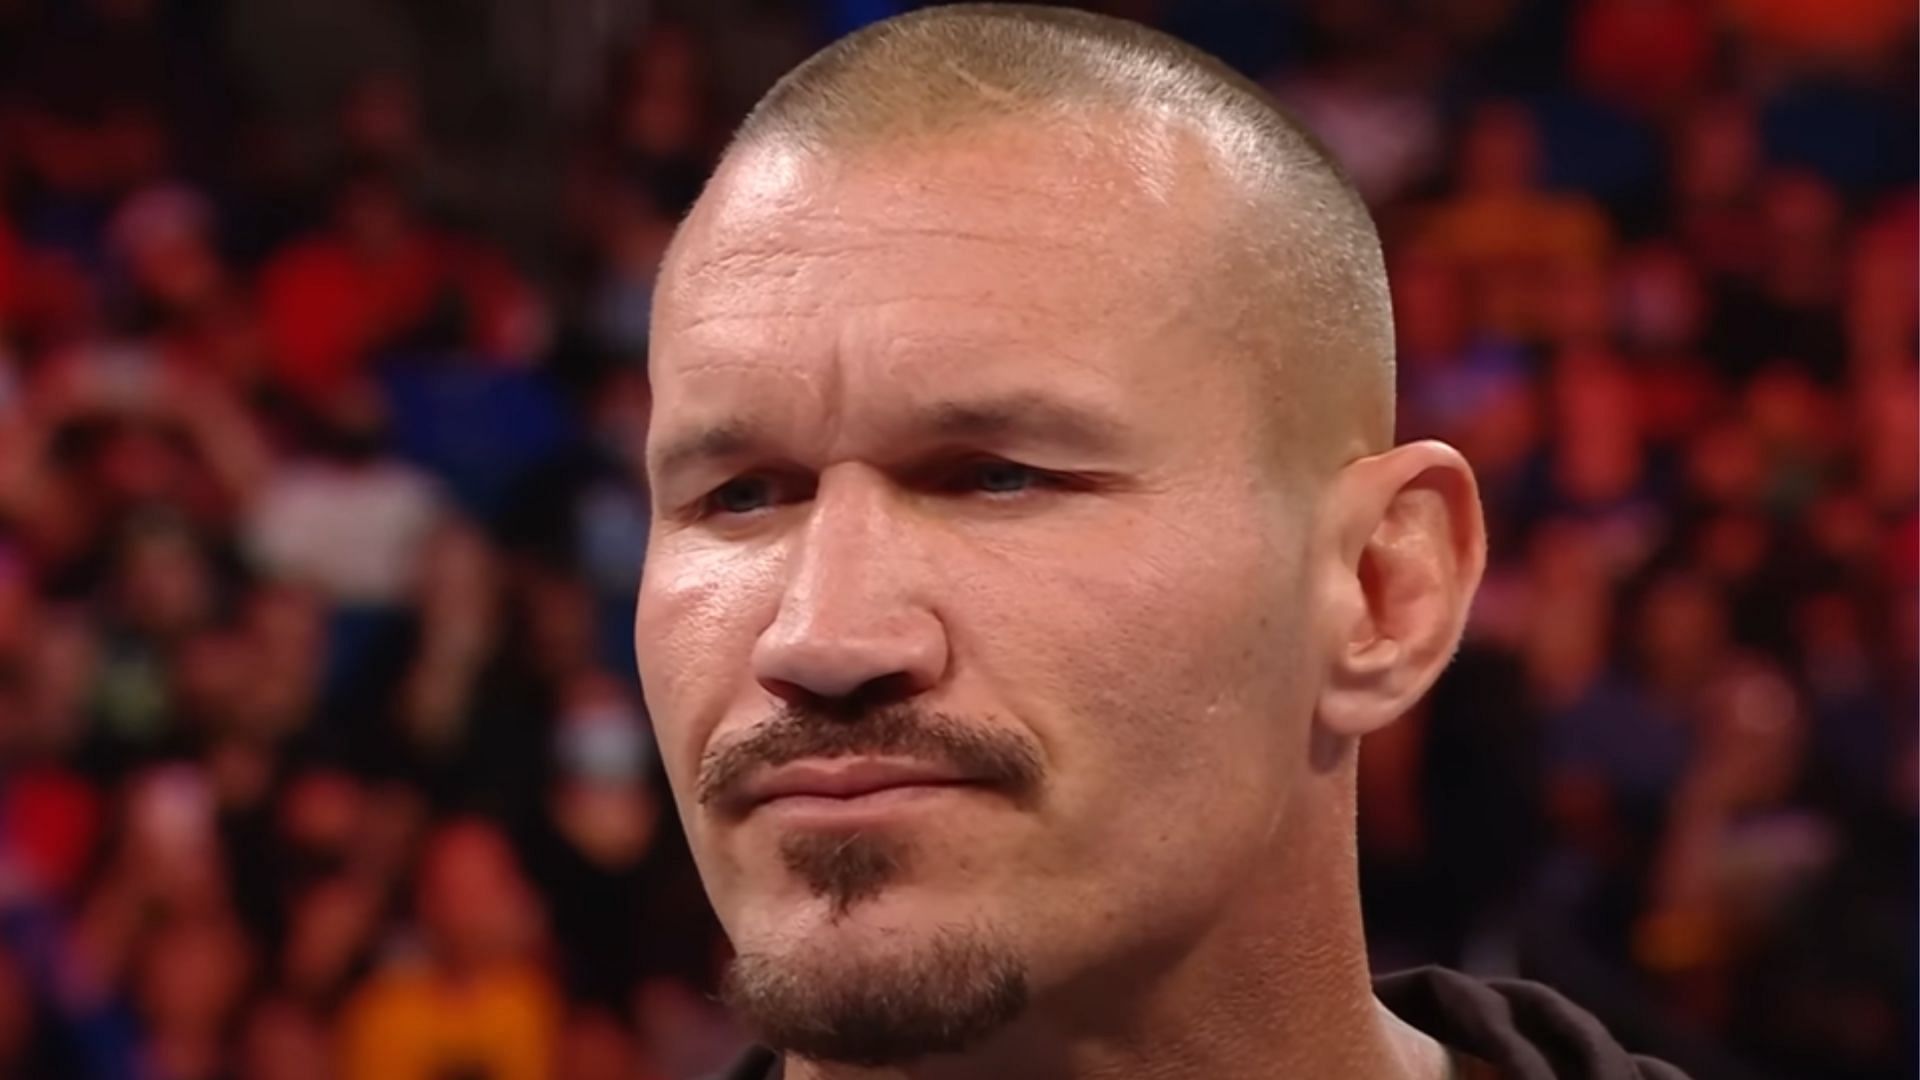 Randy Orton is widely viewed as one of WWE